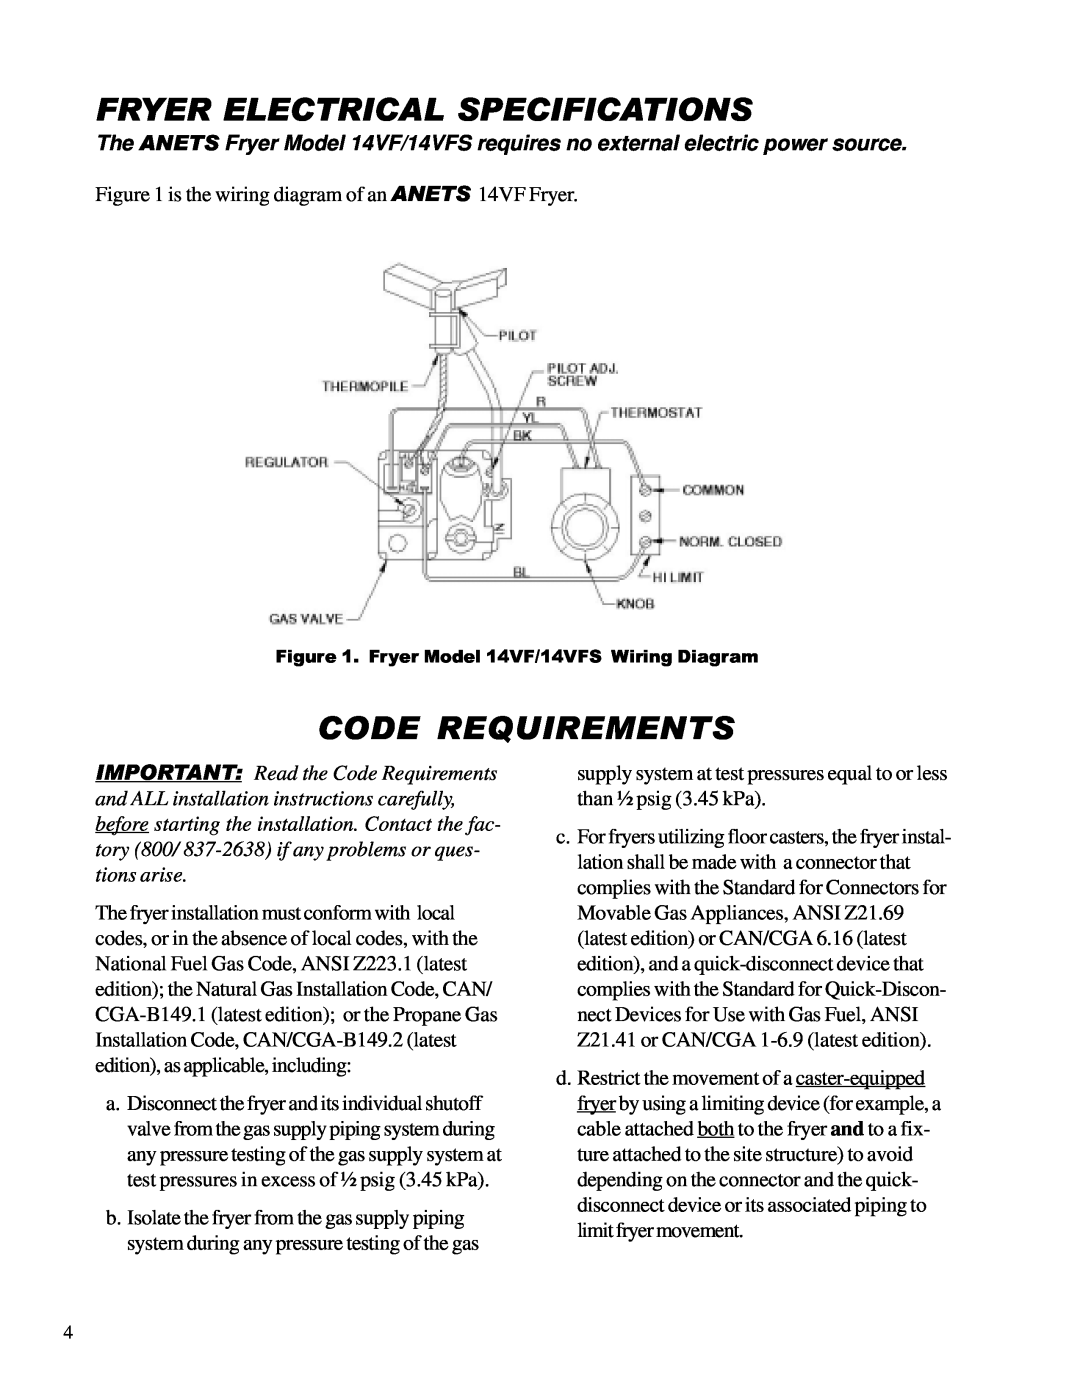 Anetsberger Brothers warranty Fryer Electrical Specifications, Code Requirements, Fryer Model 14VF/14VFS Wiring Diagram 